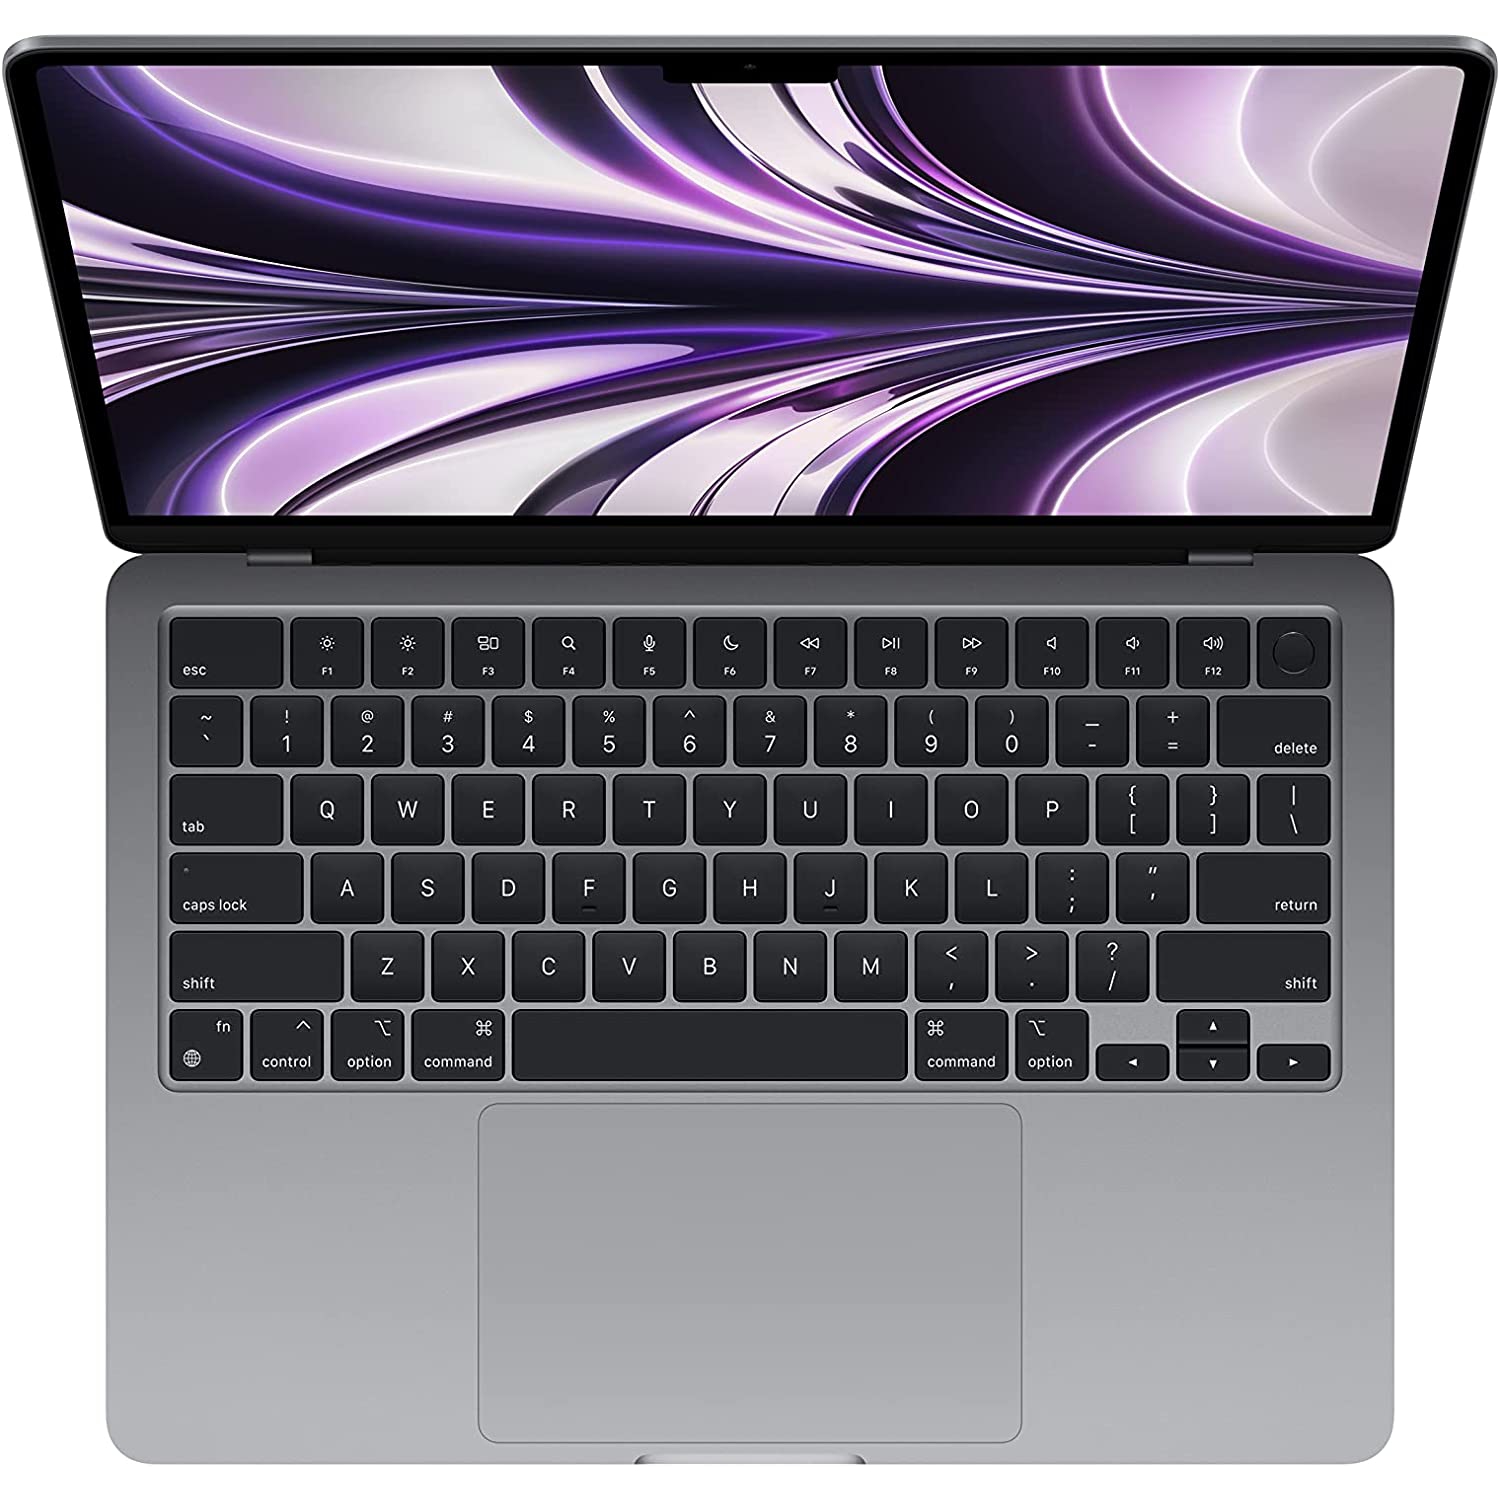 Refurbished (Excellent) - 2022 Apple MacBook Air with M2 Chip (13-inch, 8GB RAM, 512GB SSD) Space Gray